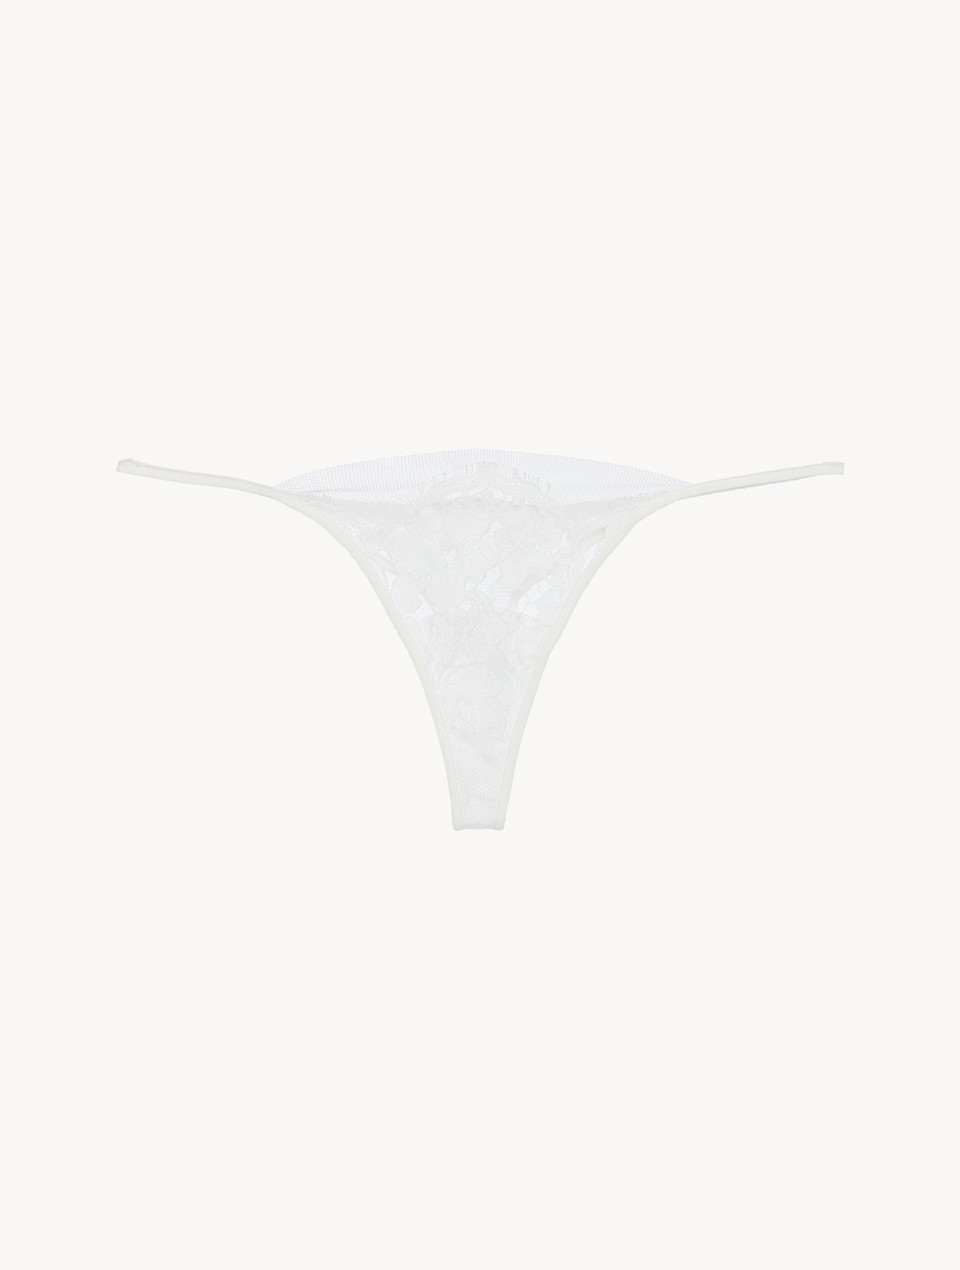 Lycra Underwired Bra in White with Embroidered Tulle | La Perla